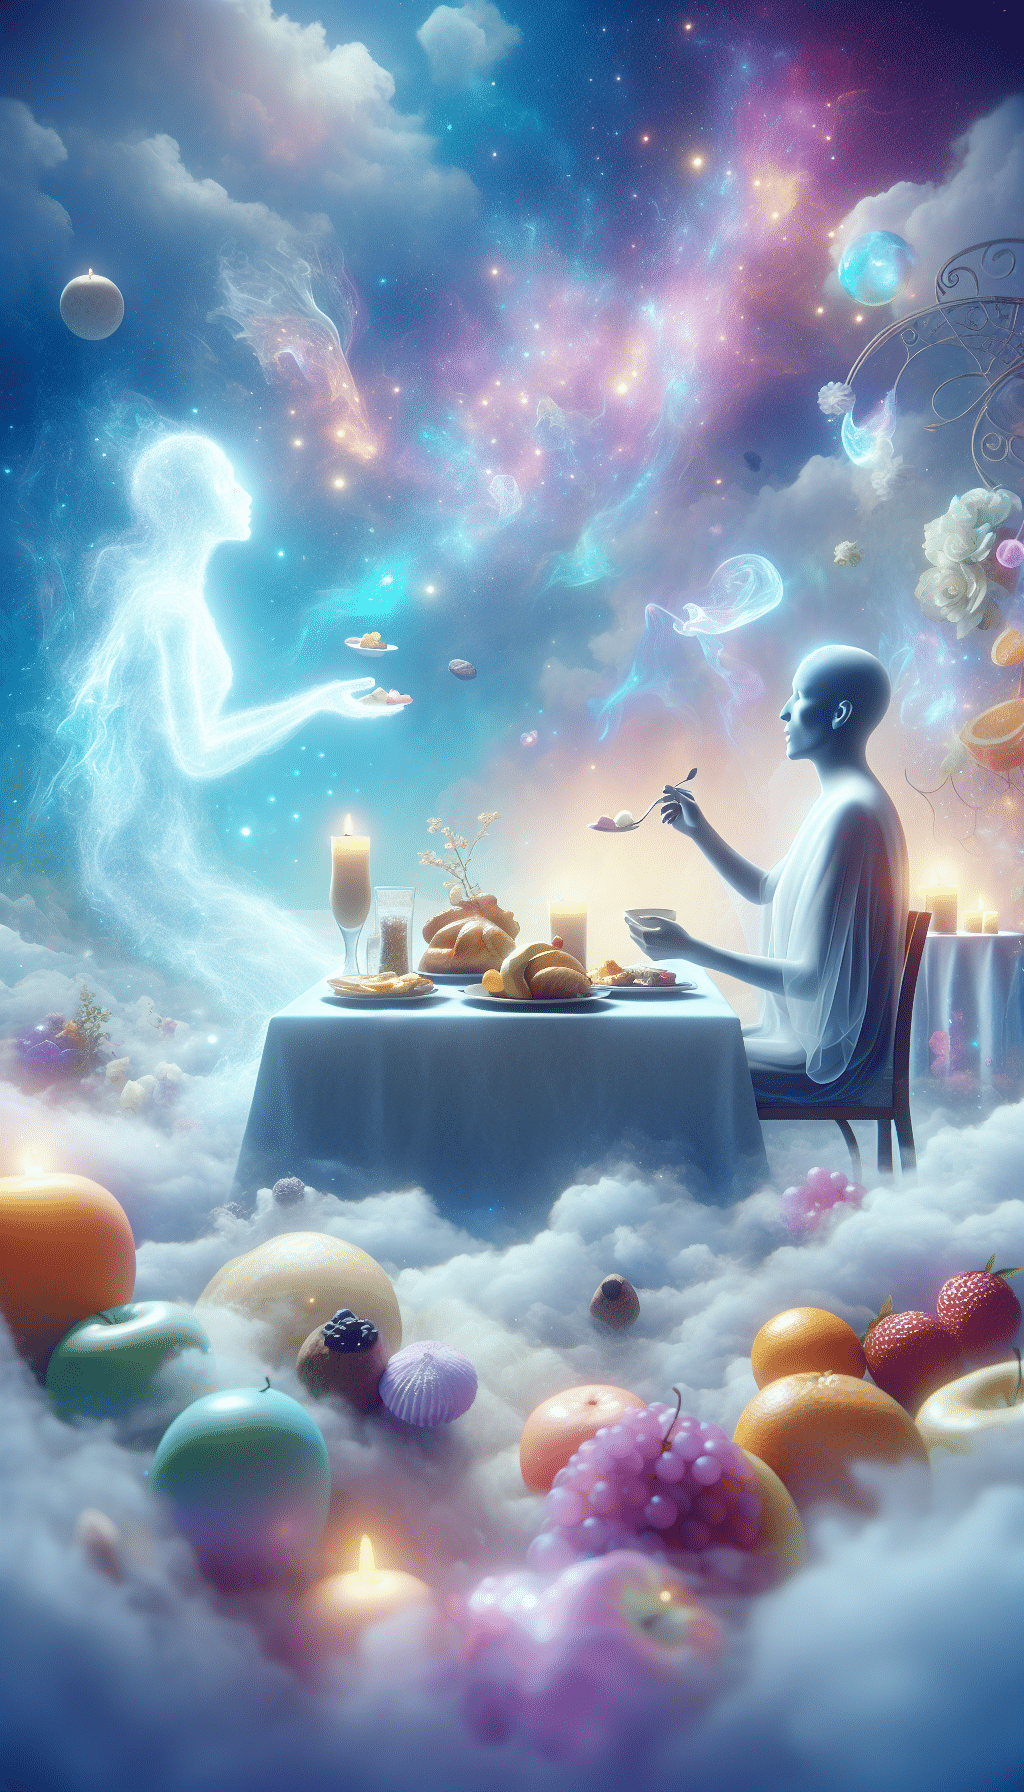 Meaning of Seeing a Dead Person Eating Food in Your Dream